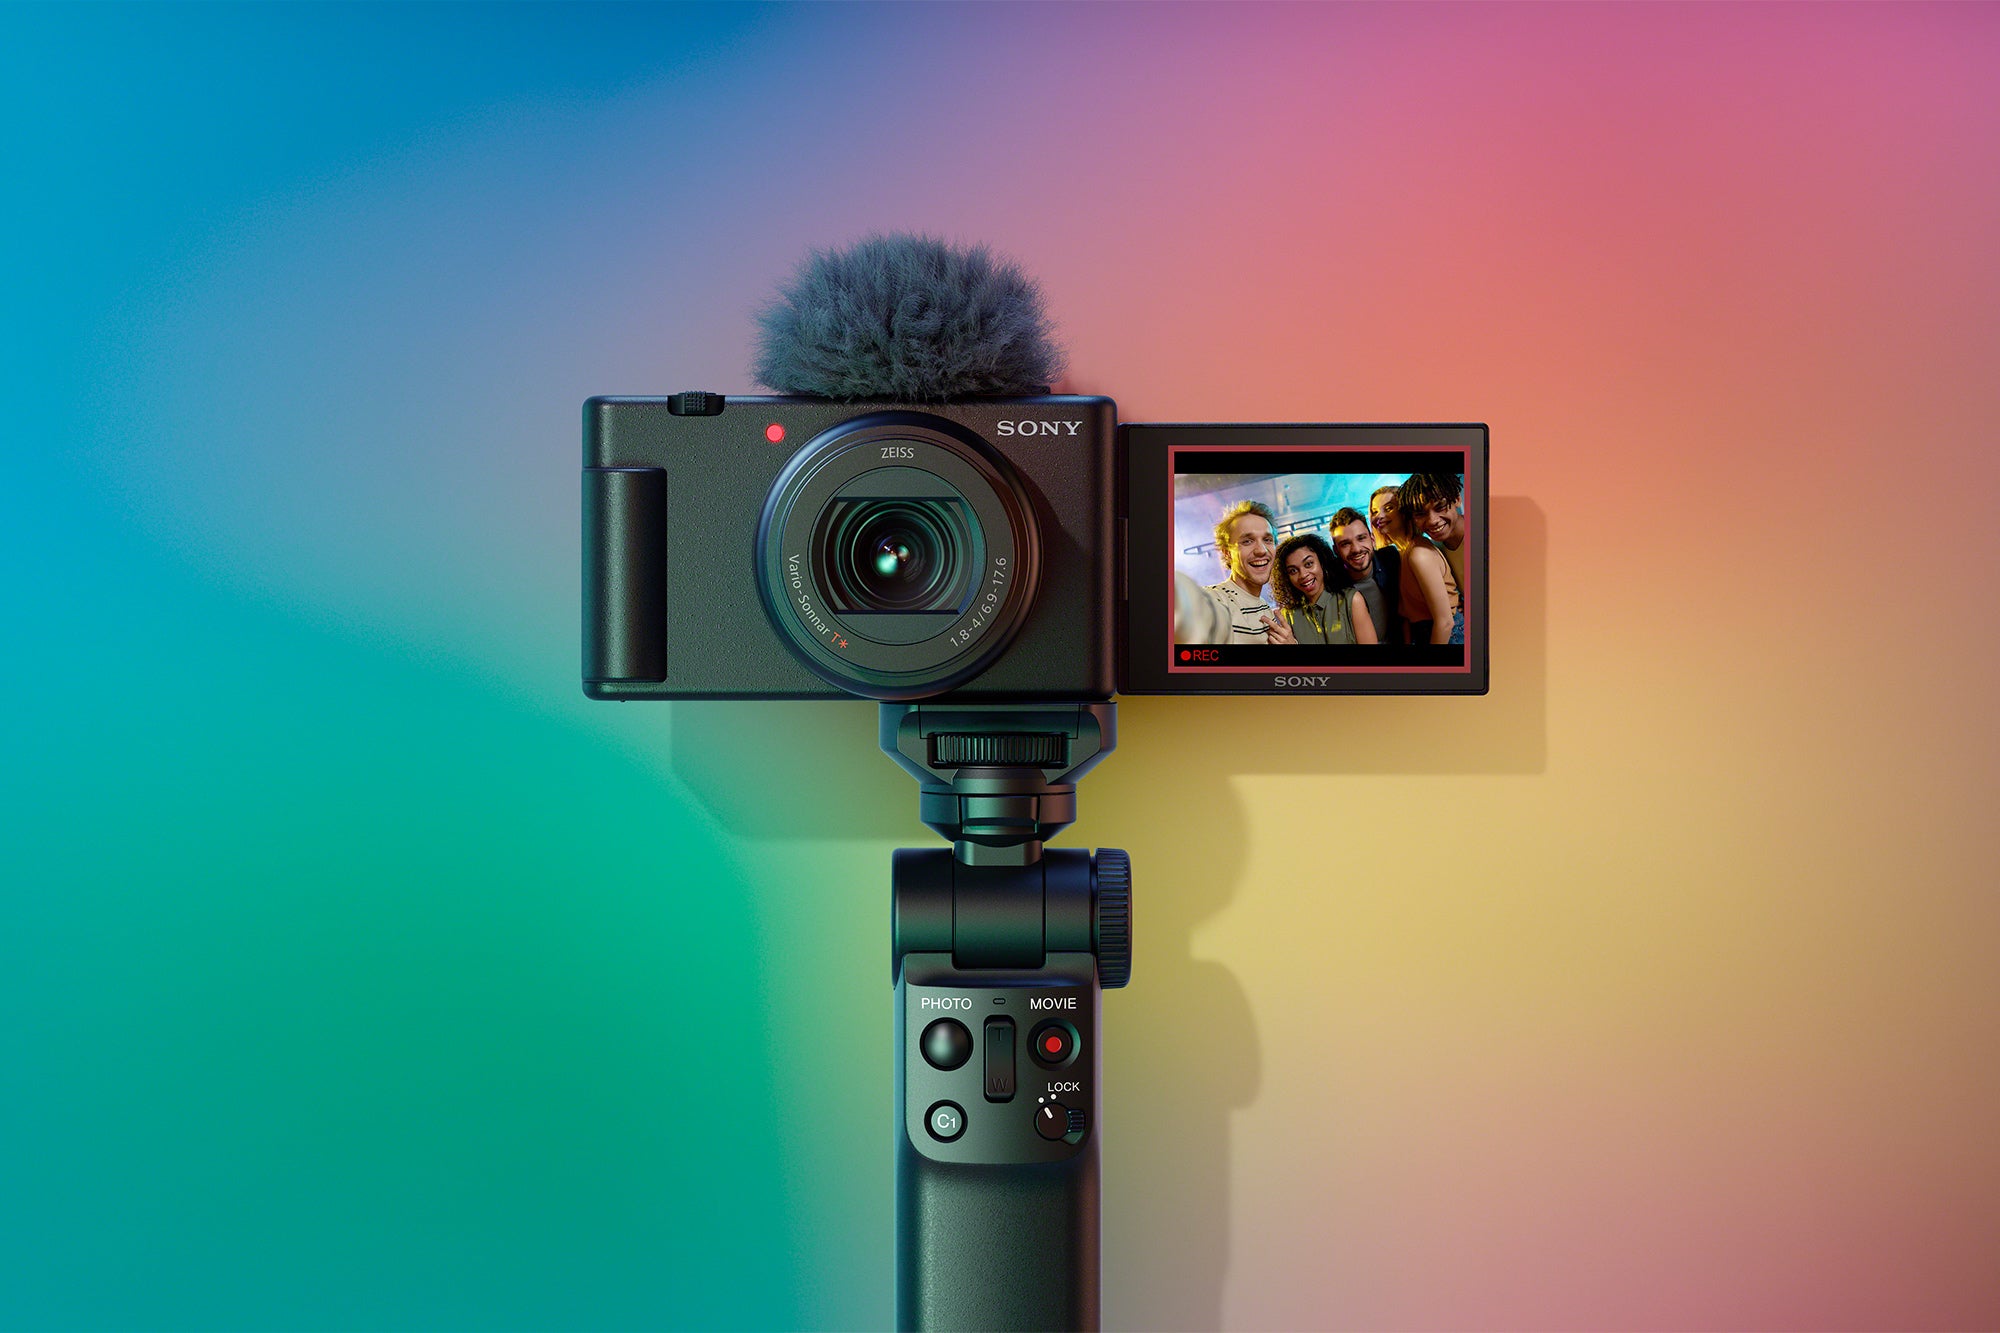 The Sony ZV-1 II camera has a wider lens and more vlogging features